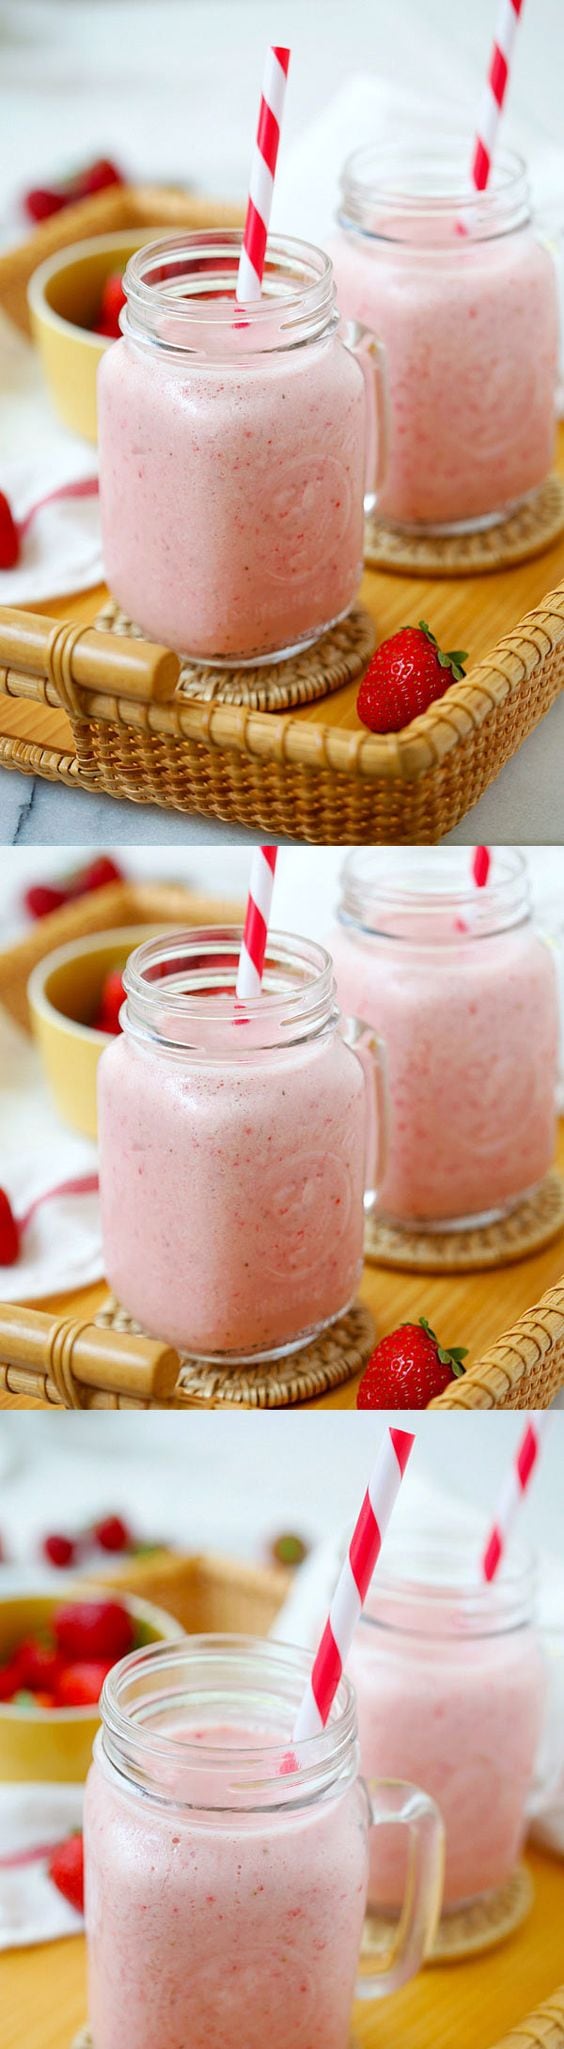 Jamba Juice Strawberry Wild Copycat - an easy recipe that is exactly like the real smoothie at Jamba Juice. Healthy & budget-friendly! | rasamalaysia.com